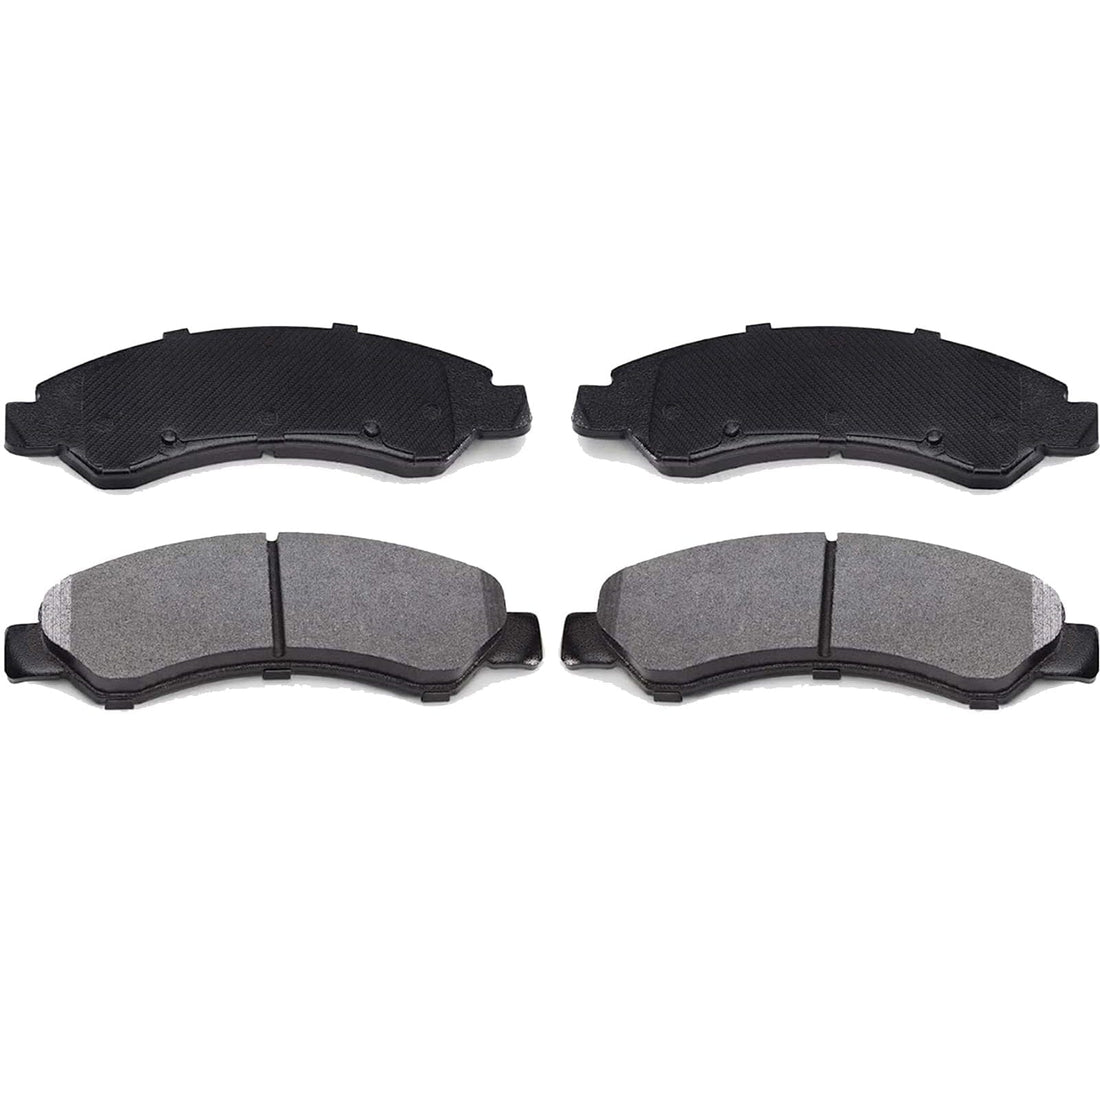 Front Brake Pads STP1330 Ceramic Front Disc Brake Pads Replacement for 08-09 LaCrosse